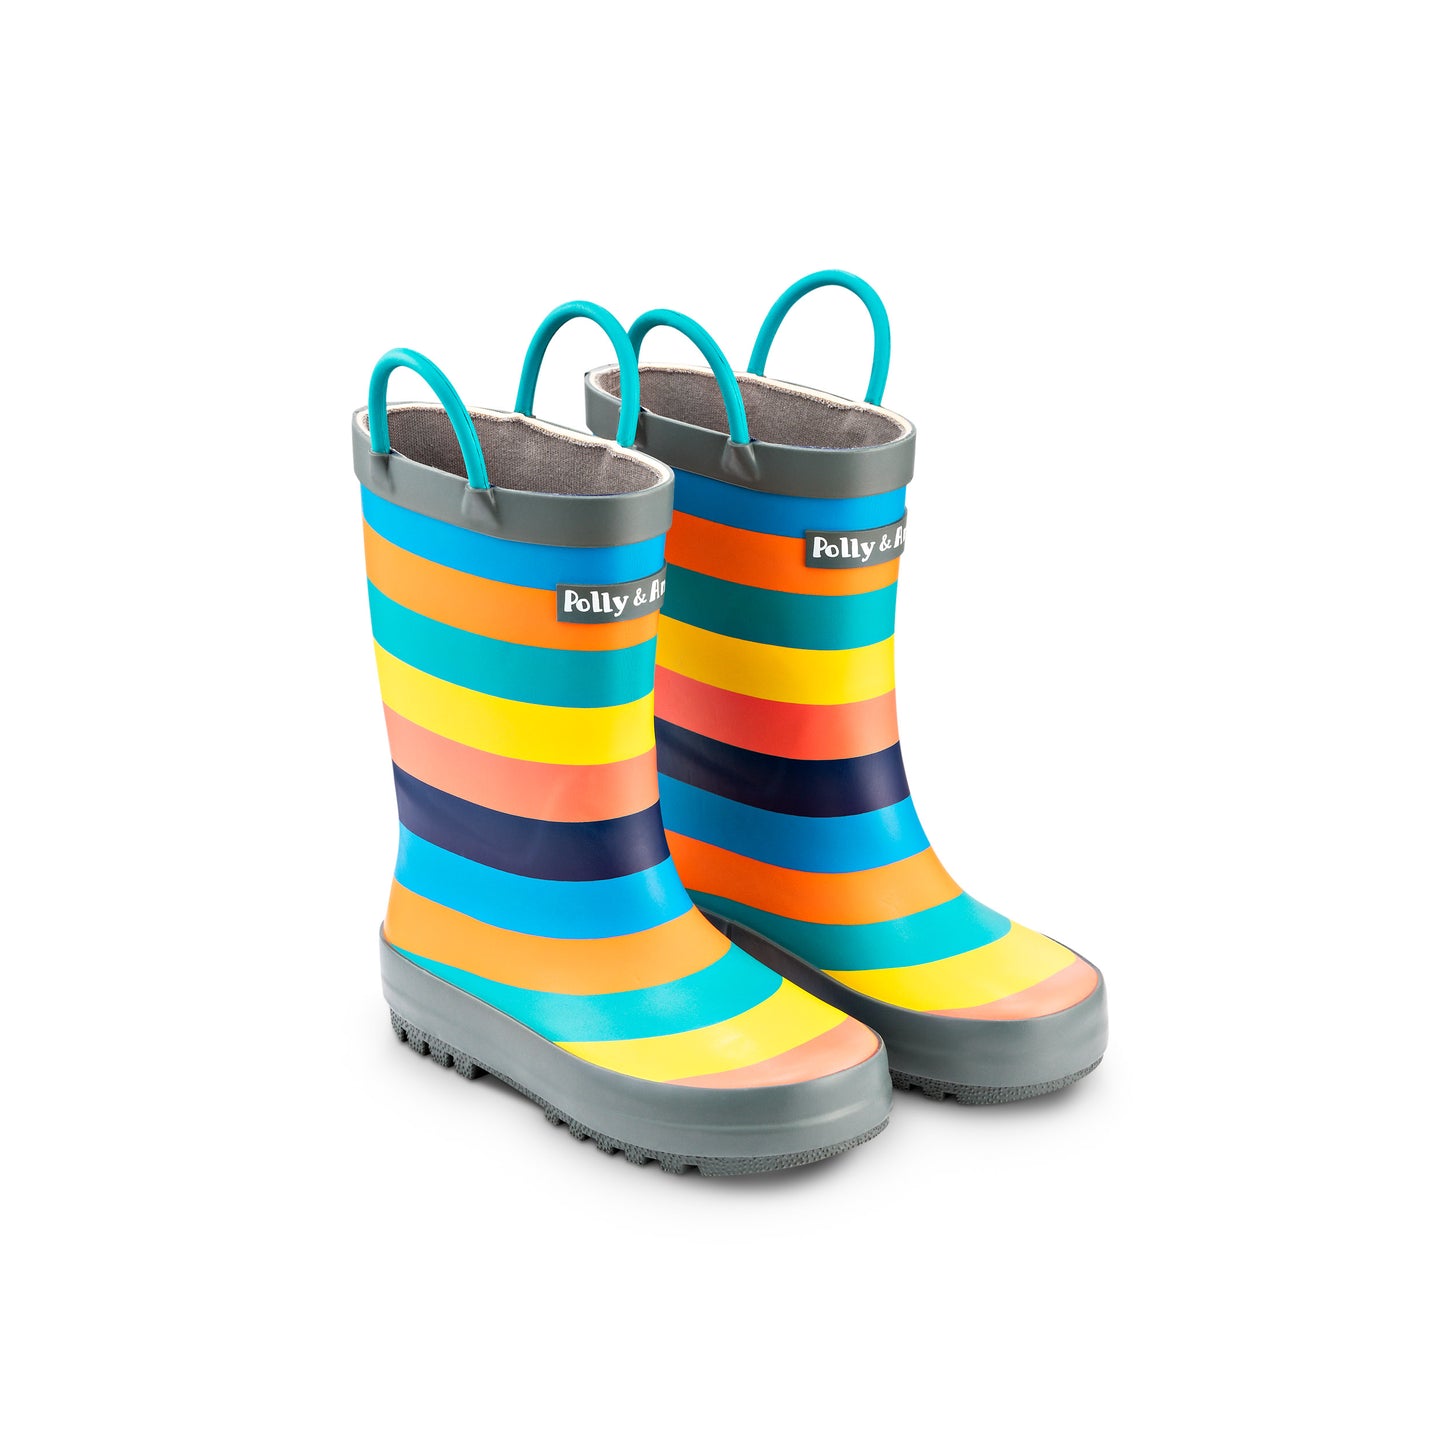 Order now to get your Sustainable Rainboots for dispatch on April 15th! Including FREE shipping AND a free pair of rainbow knee high bamboo socks too!